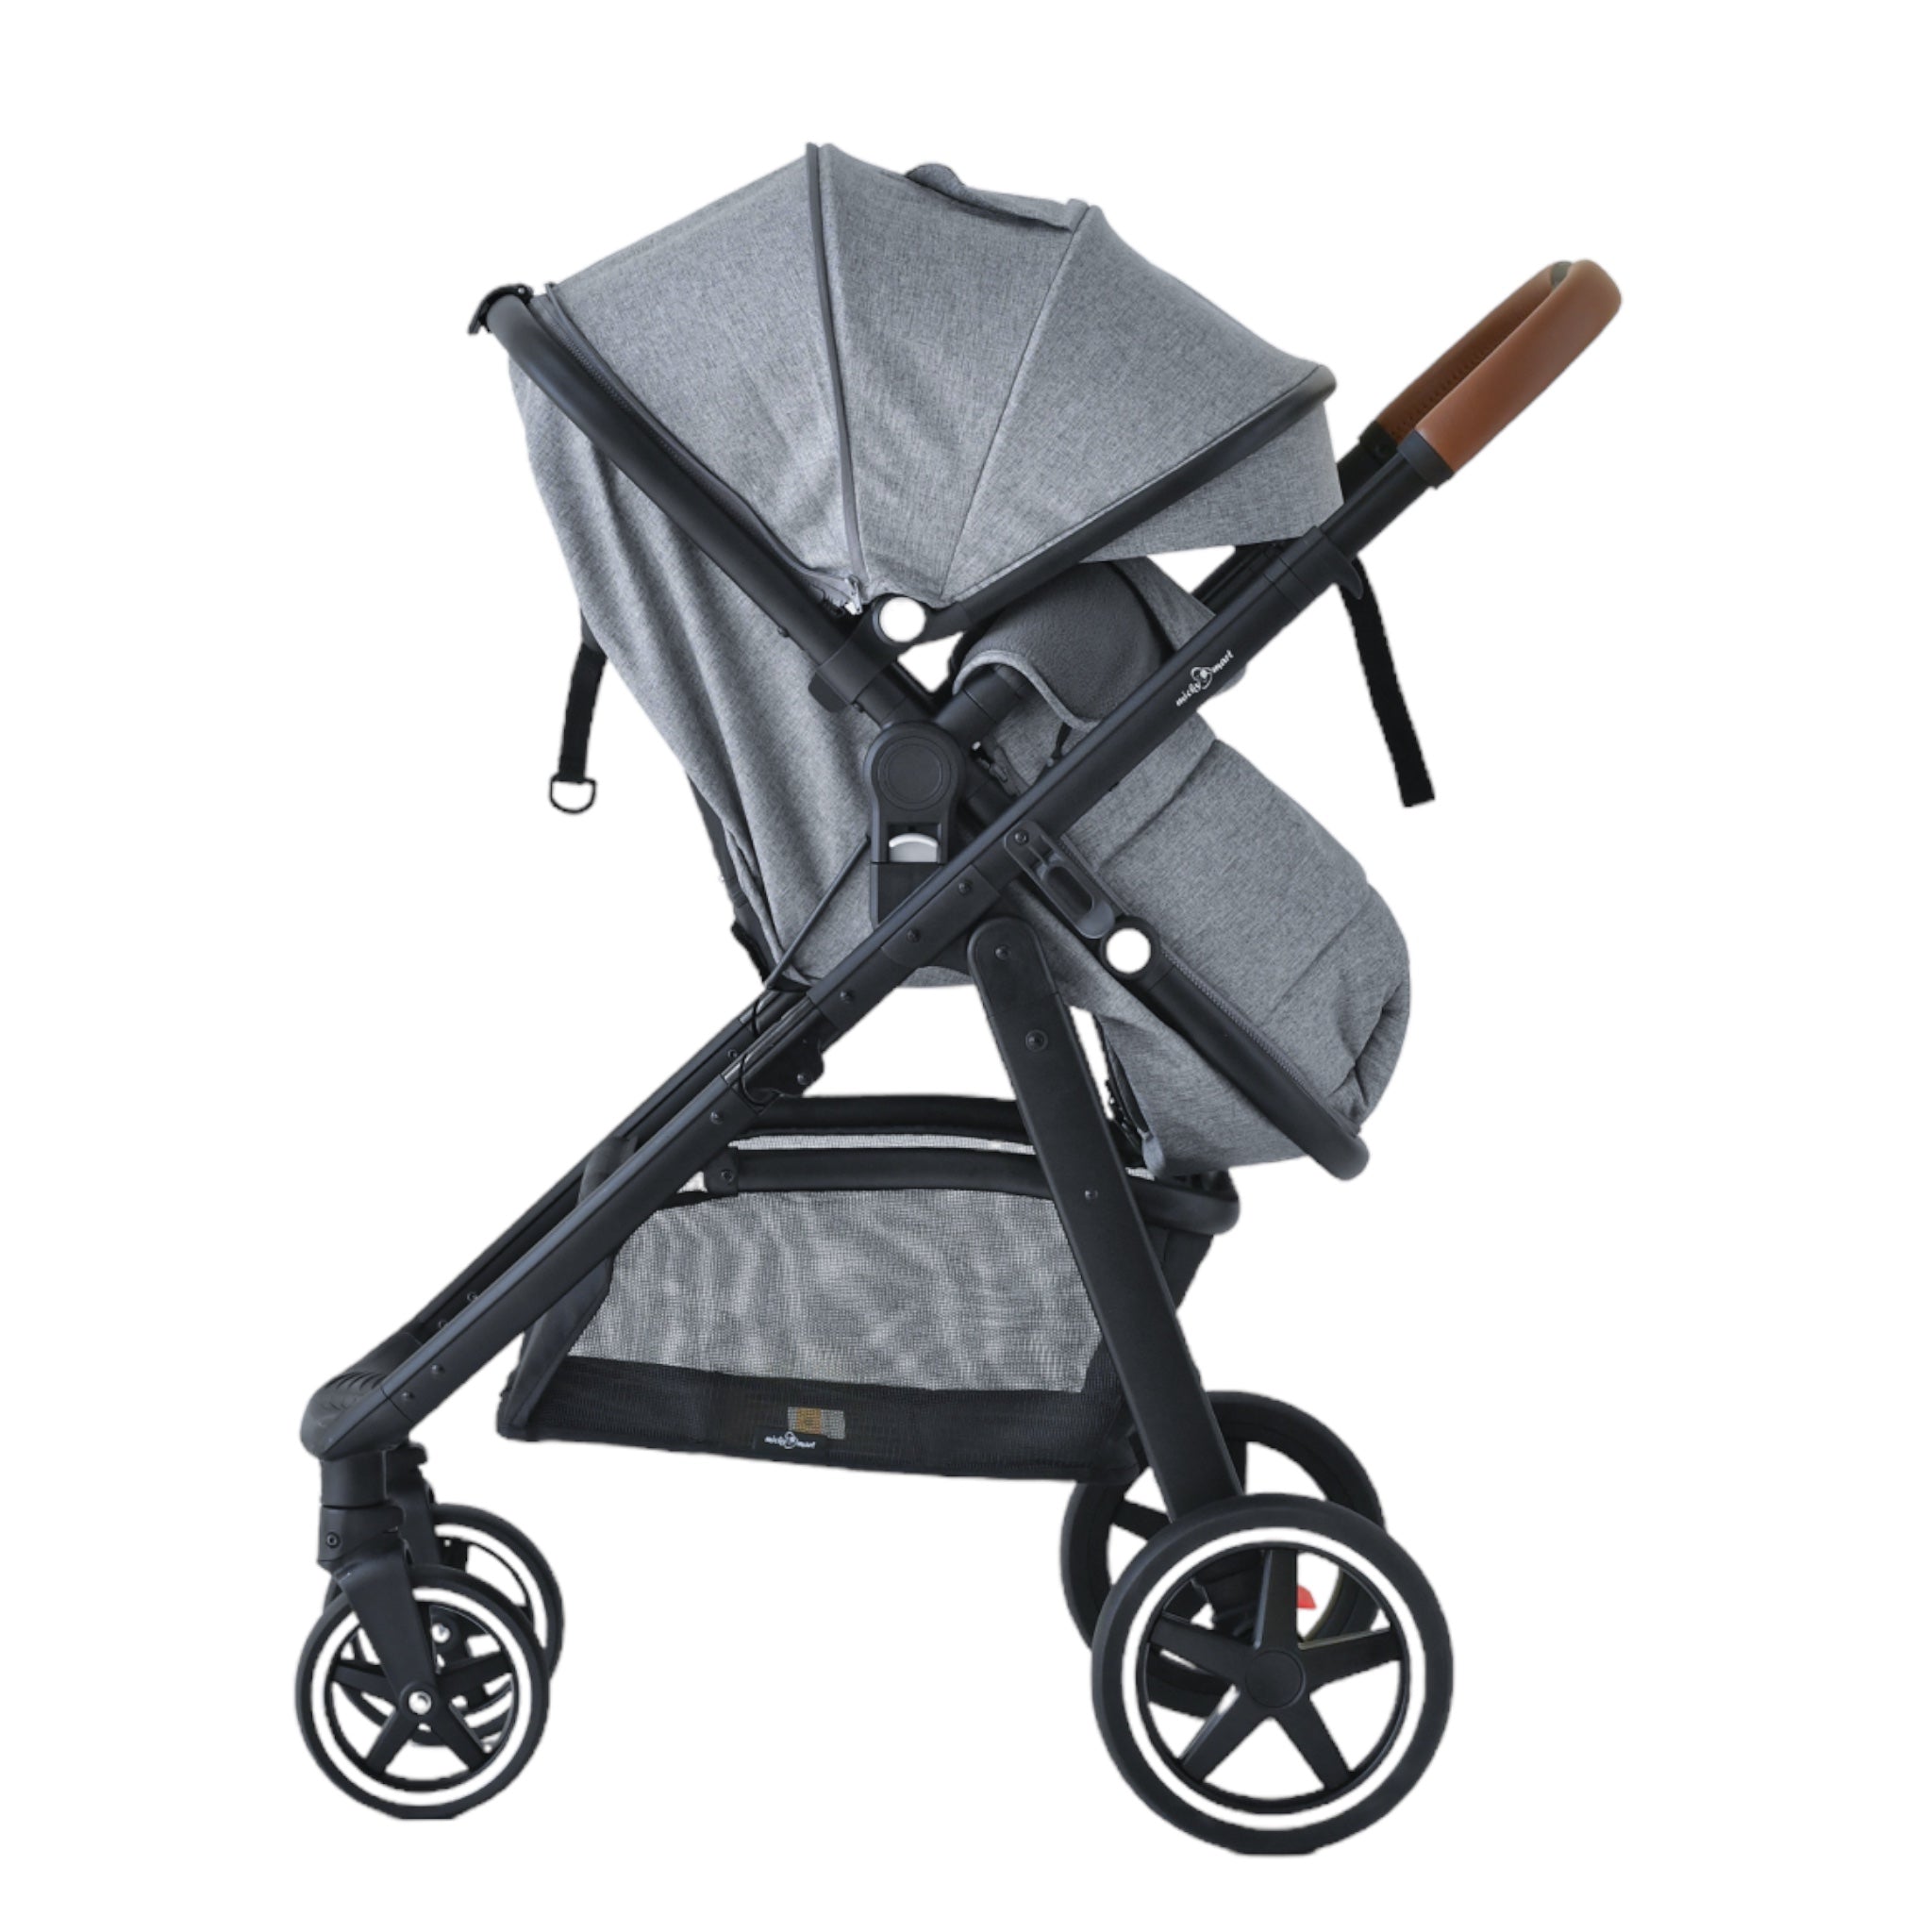 Micky Mart Baby Pram / Stroller 2 in 1 Convertible Leather Handle - Grey